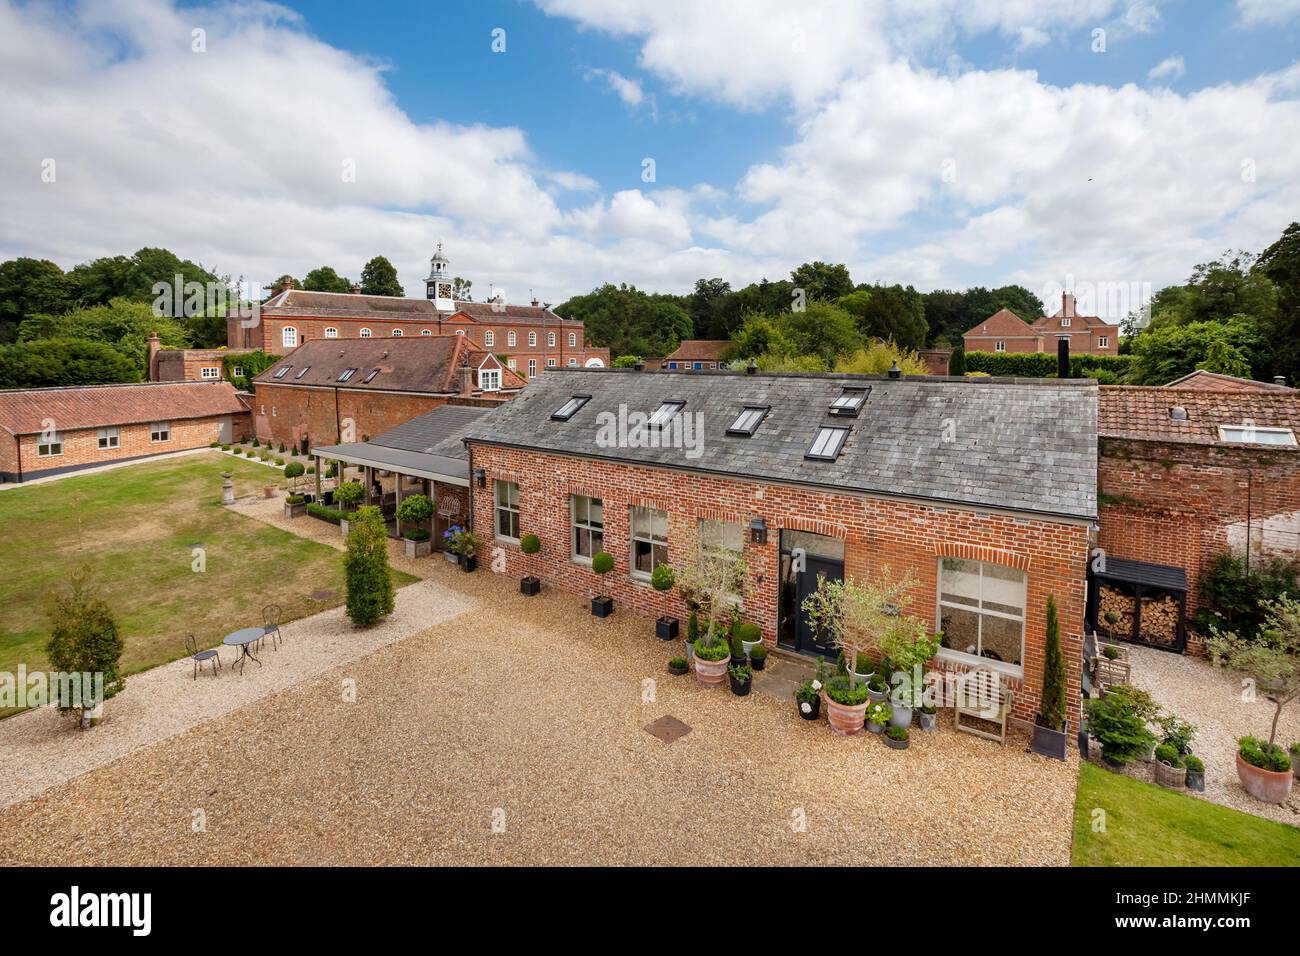 Newport, Essex - July 10 2018: Old outbuilding of country house converted into luxurious brick built home with charming landscaped gardens. Stock Photo